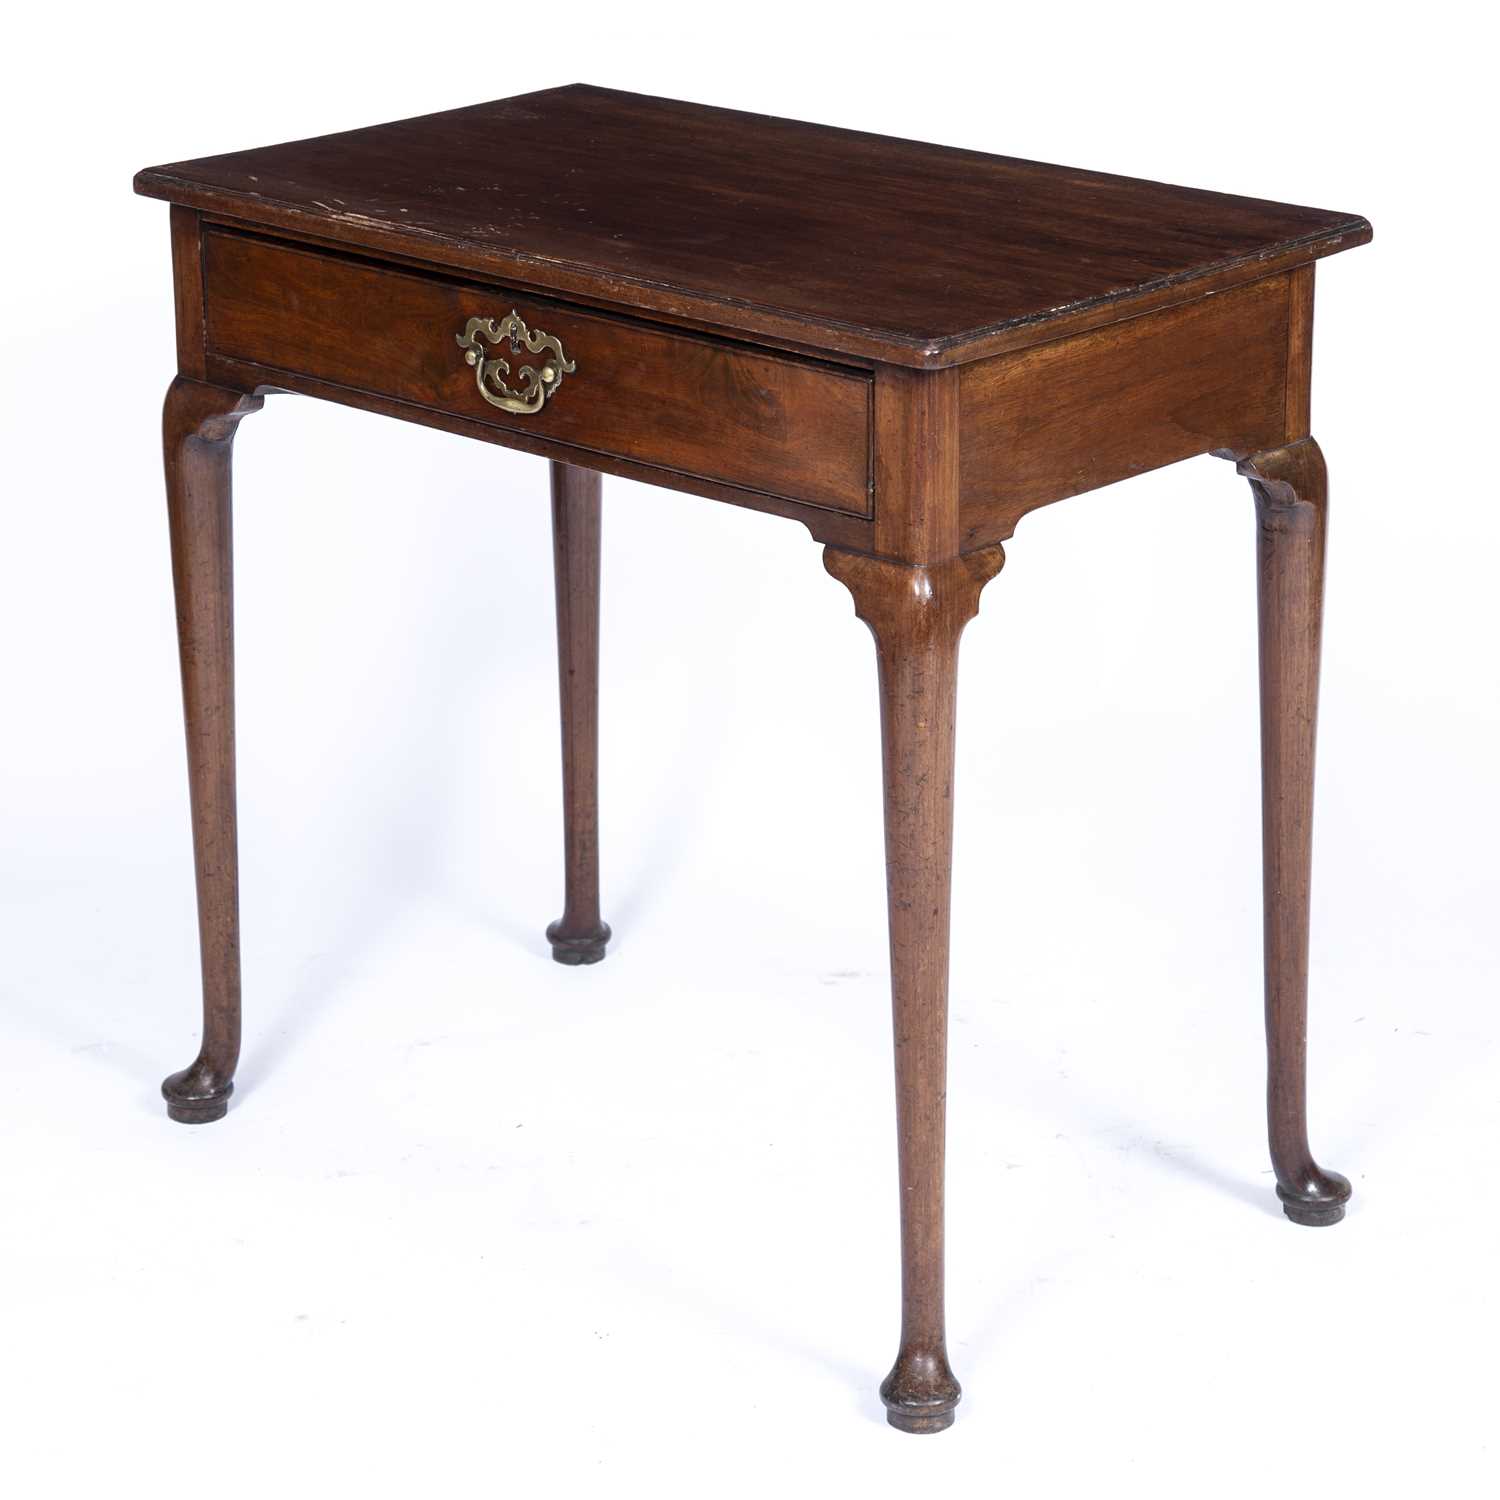 A George III mahogany single drawer side table with turned legs and pad feet, 75cm wide x 45cm - Image 3 of 6